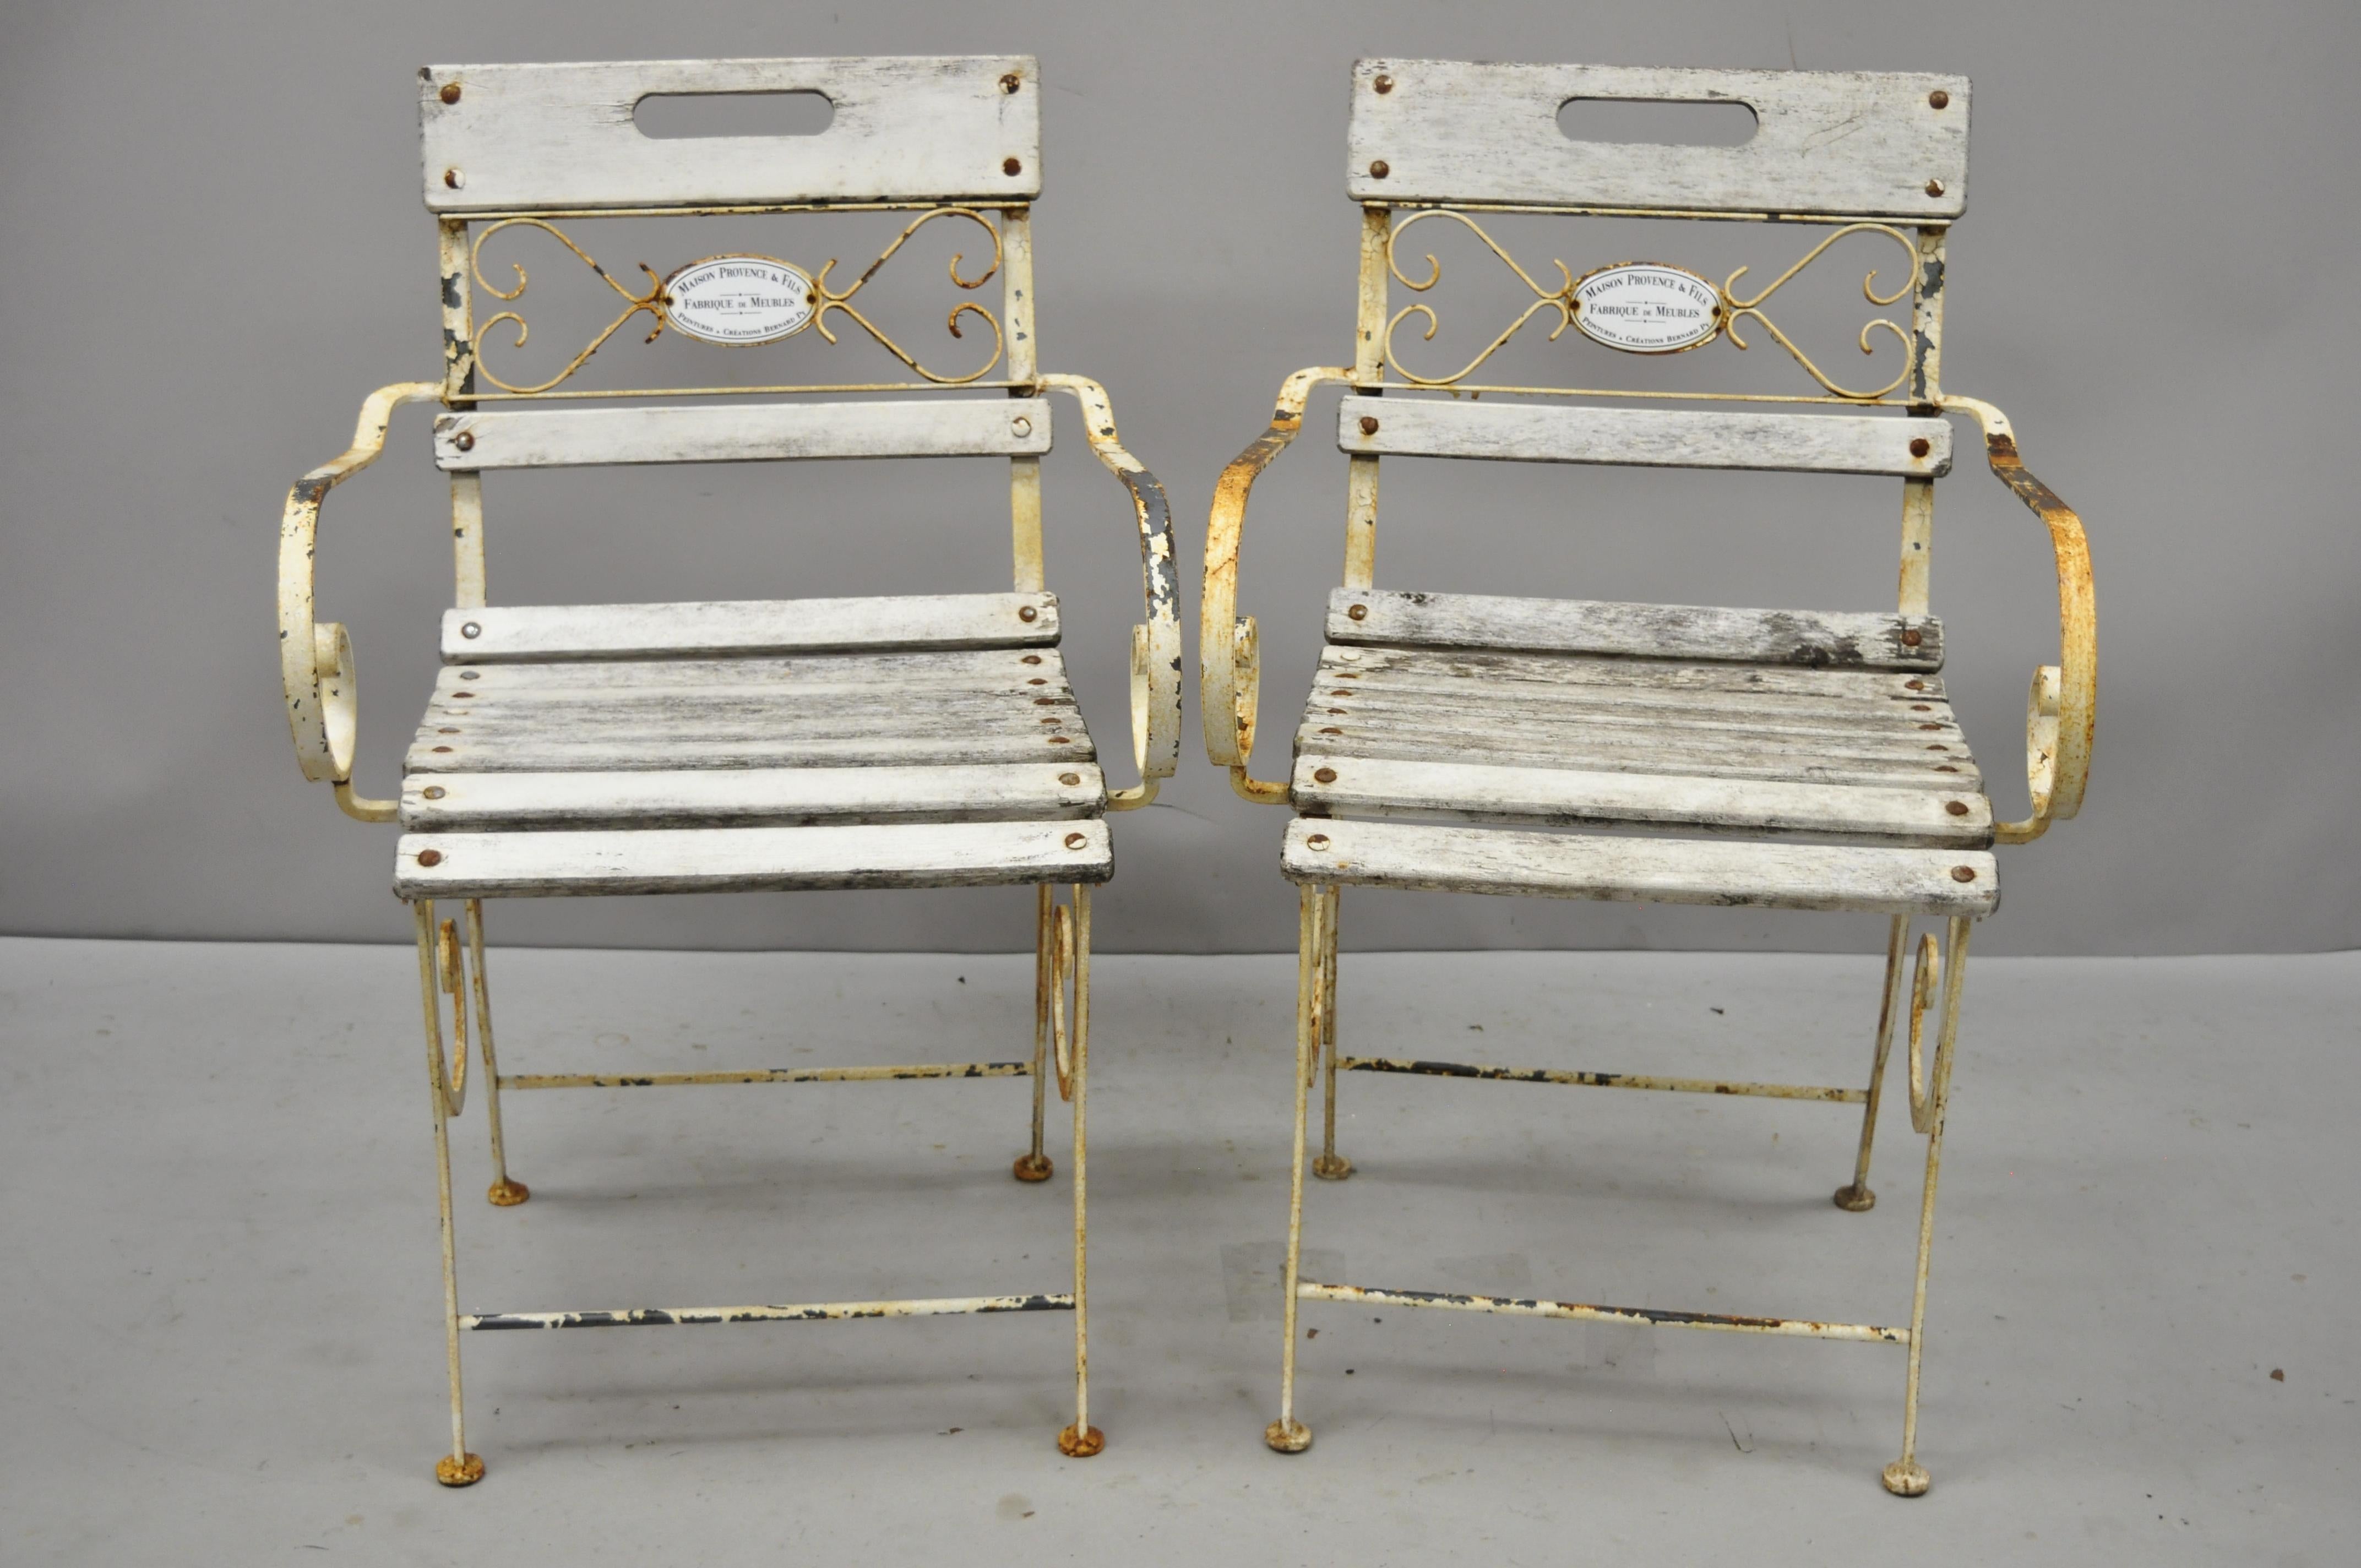 Pair of Vintage French Victorian Wrought Iron and Wooden Slat Seat Garden Arm Chairs by Maison Provence & Fils. Item features scrolling wrought iron frames, wooden slat seats, porcelain enamel plaque to back which reads 